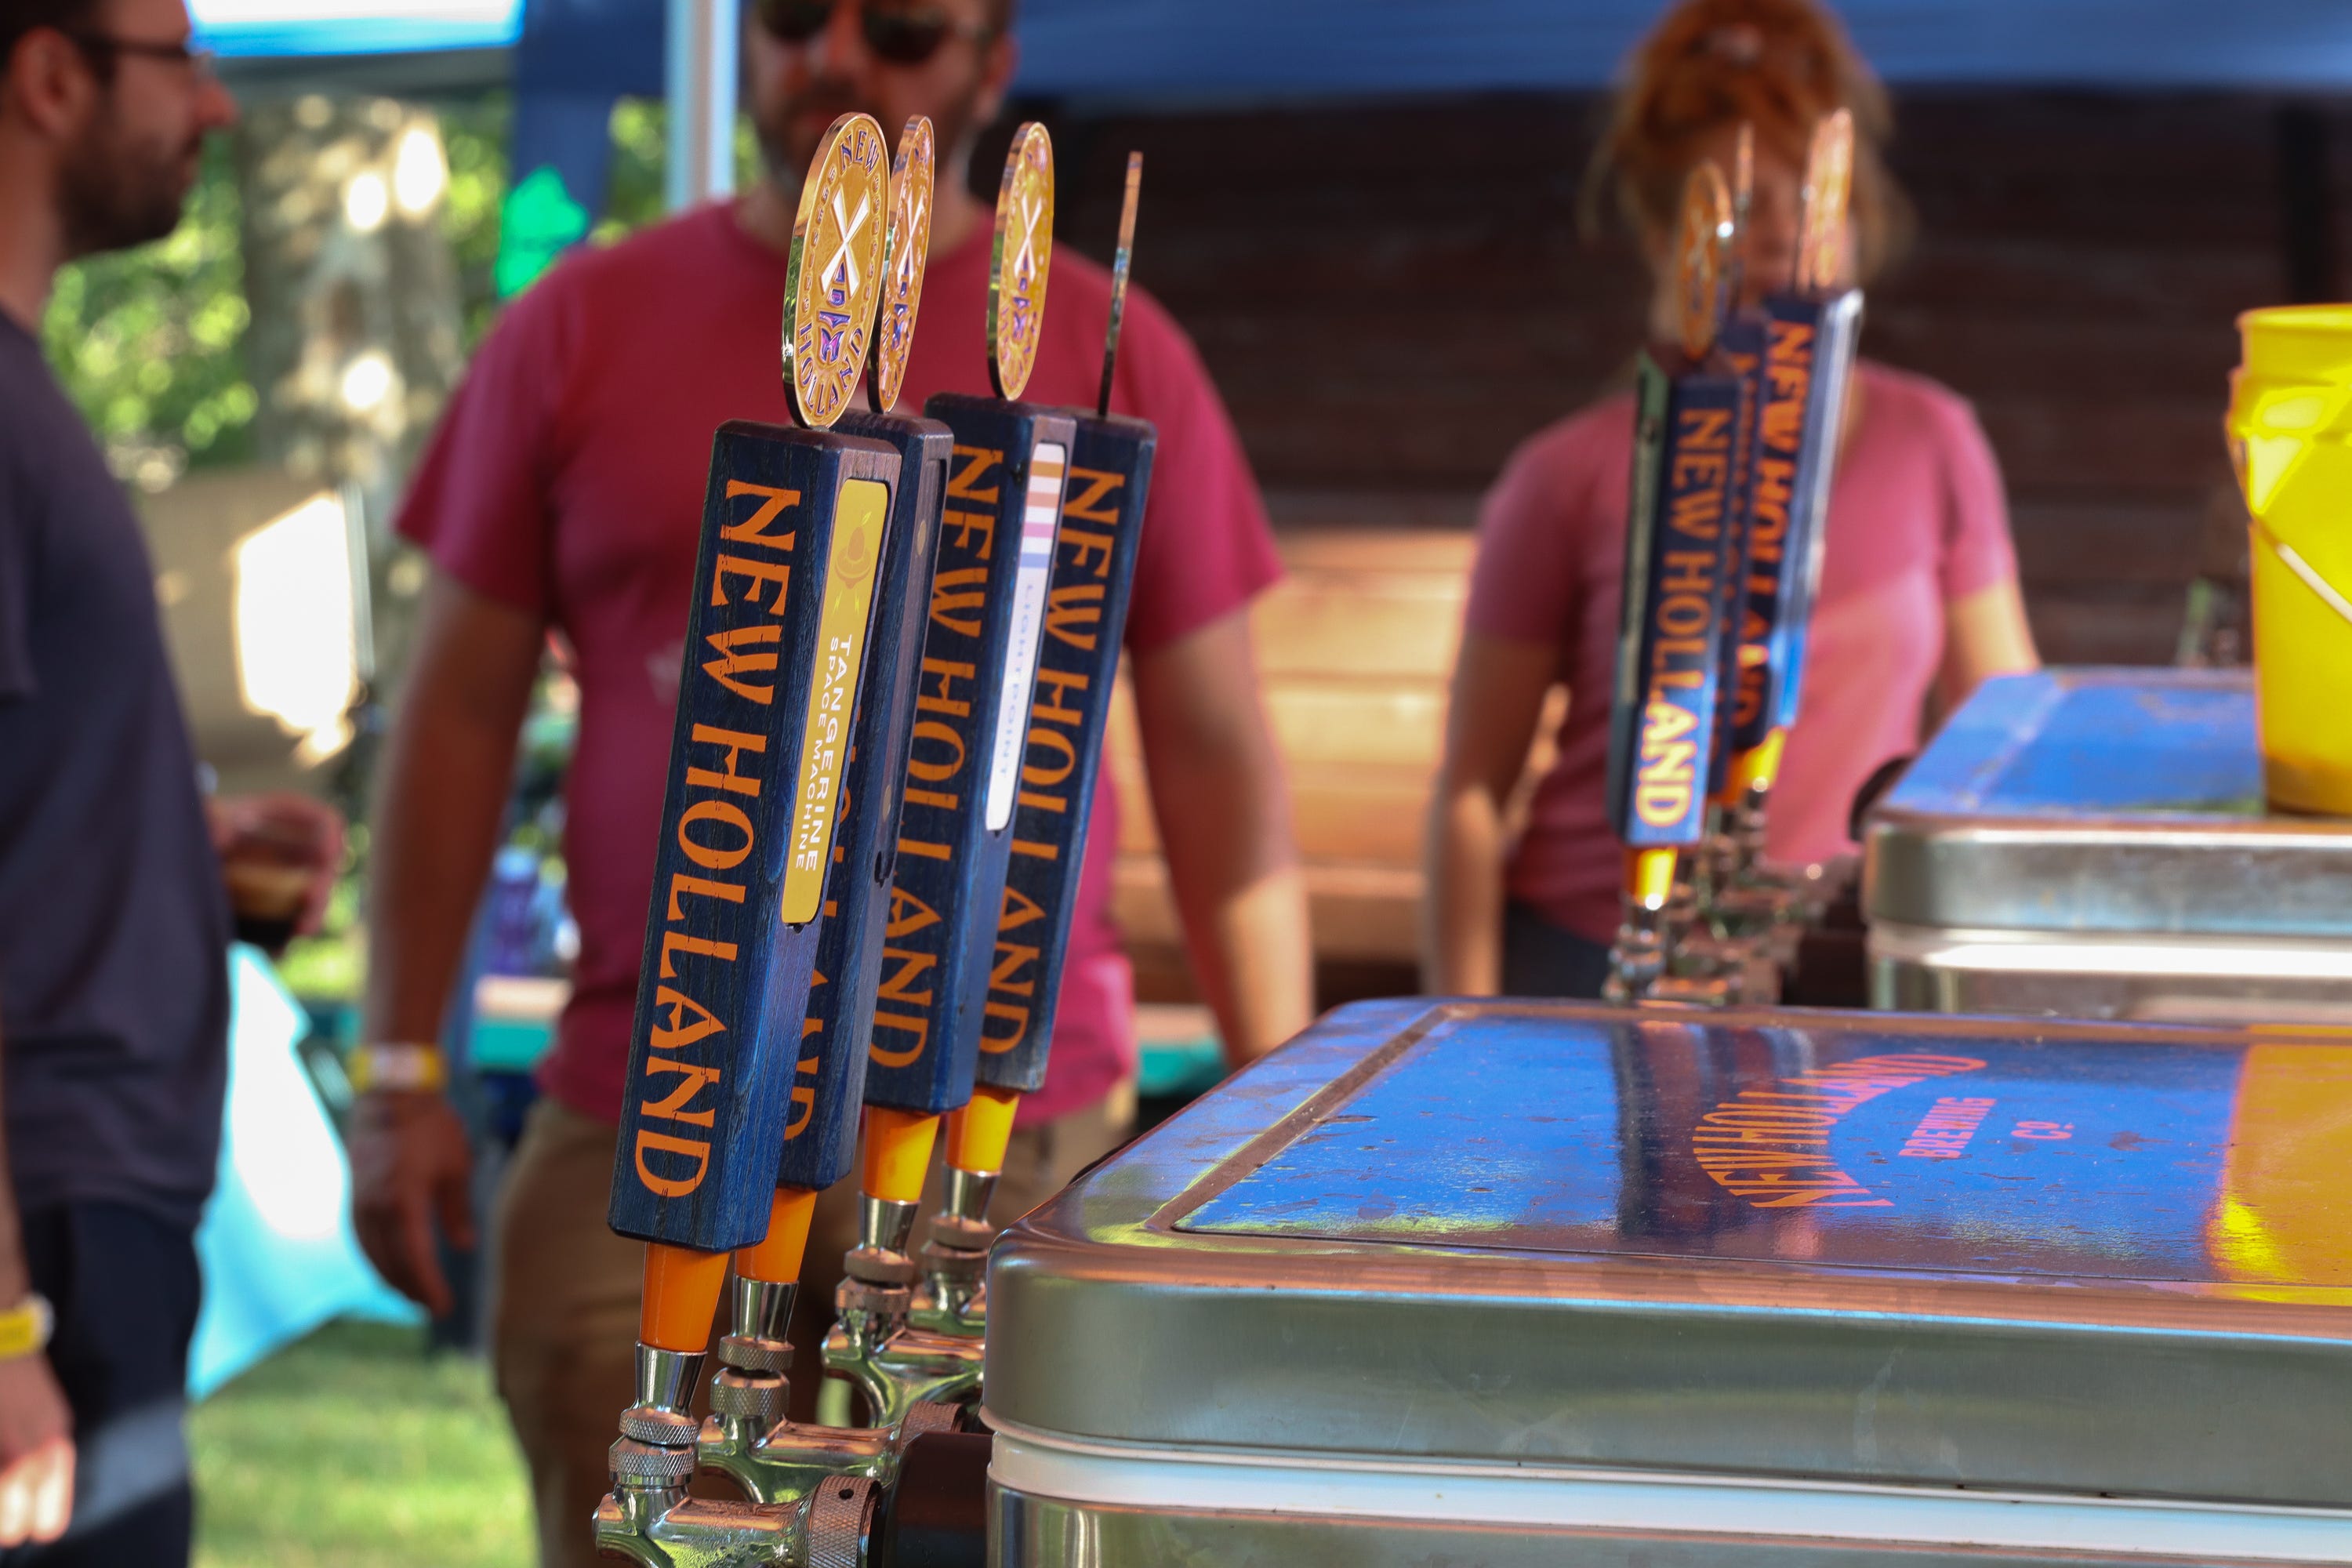 Tap handles are shown at the New Holland Brewing Co. stand at the Michigan Brewers Guild Summer Beer Festival at Riverside Park in Ypsilanti on Friday, July 22, 2022.